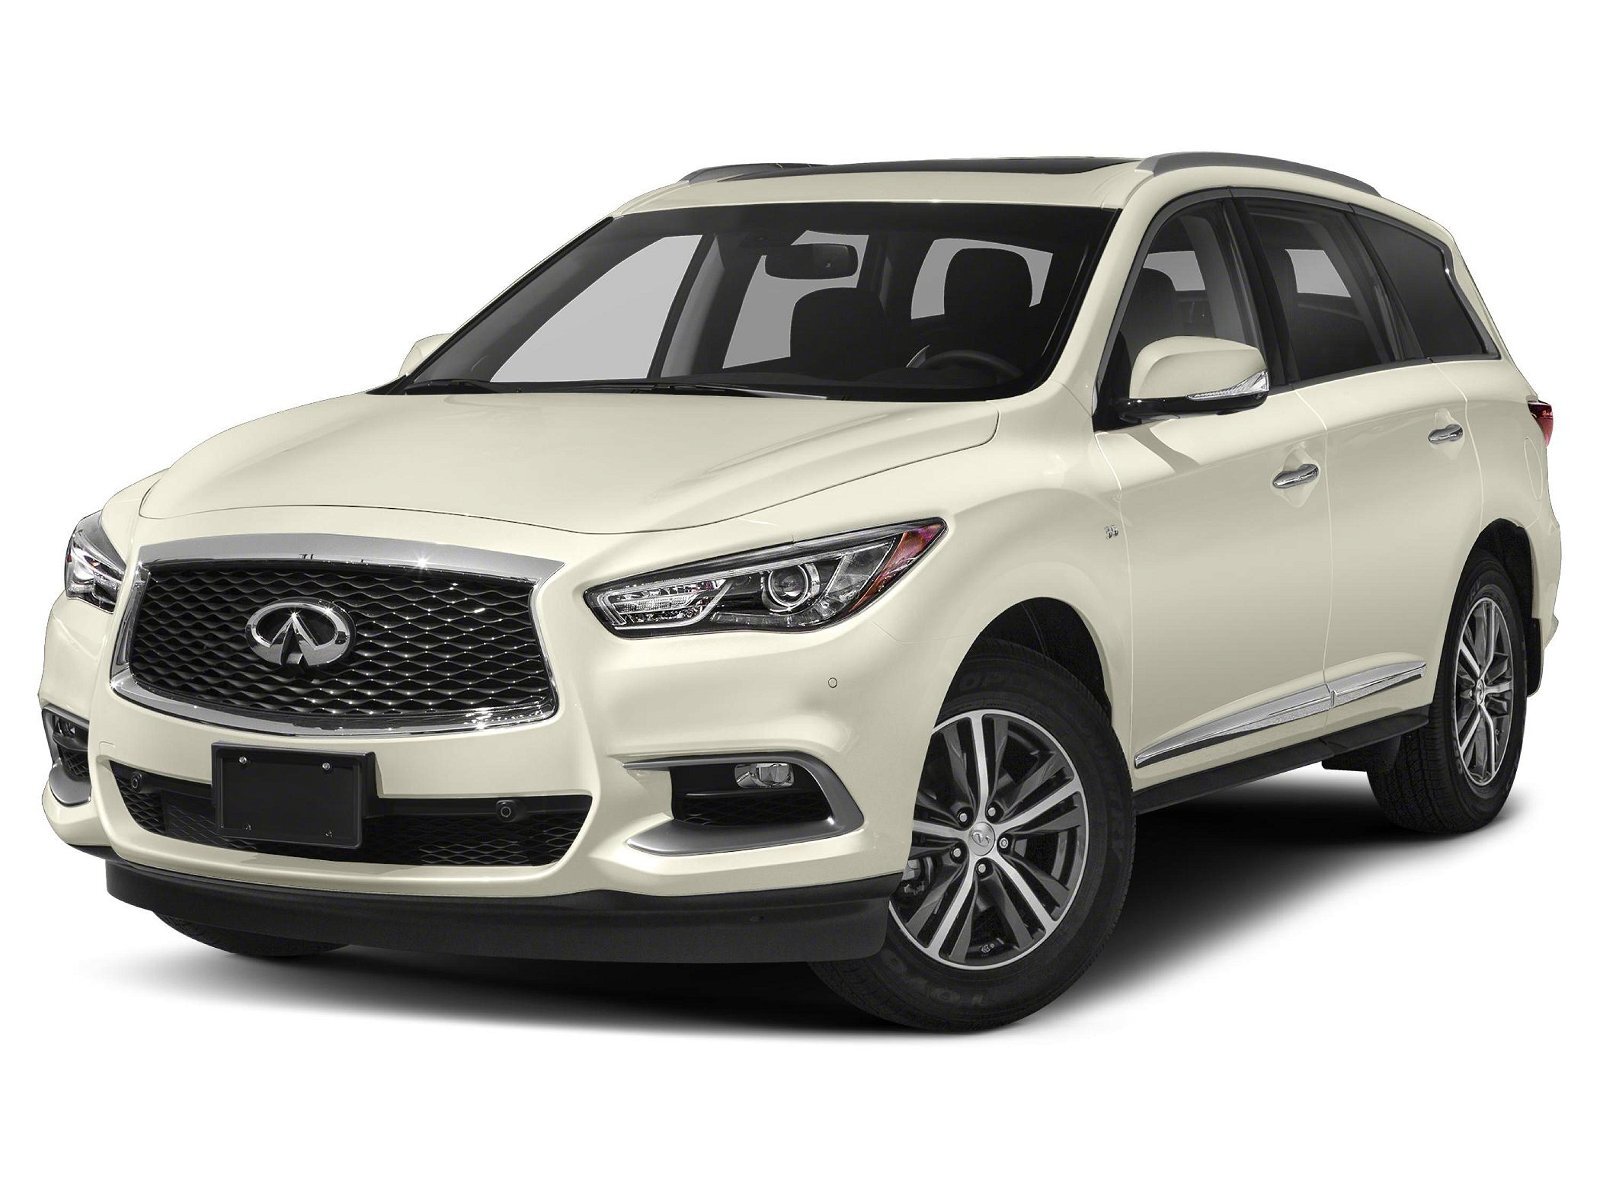 2020 Infiniti QX60 PURE Locally Owned | Low KM's